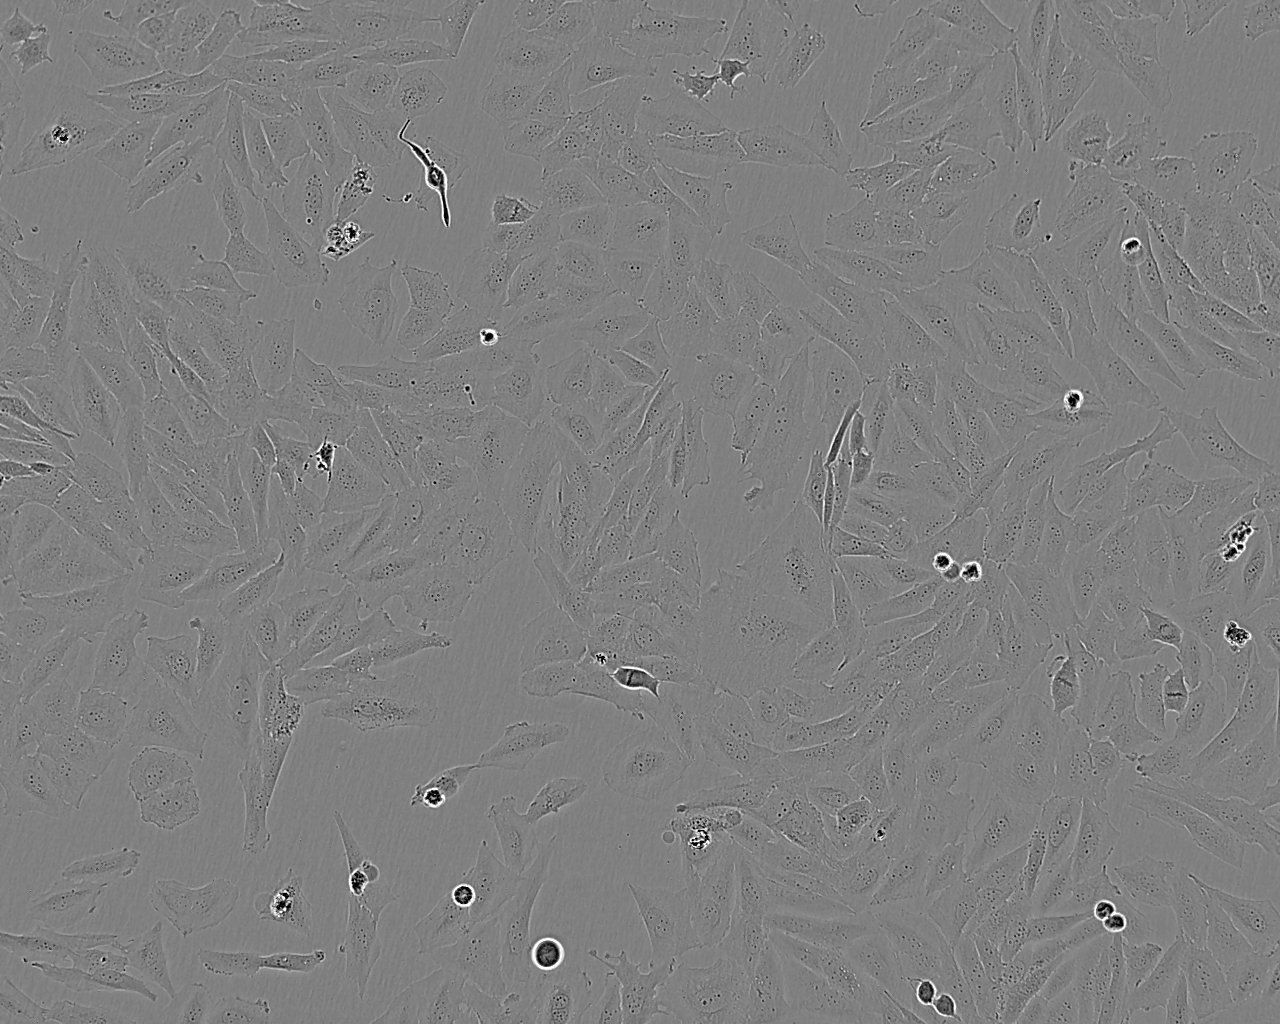 SCL-I epithelioid cells人皮肤磷癌细胞系,SCL-I epithelioid cells